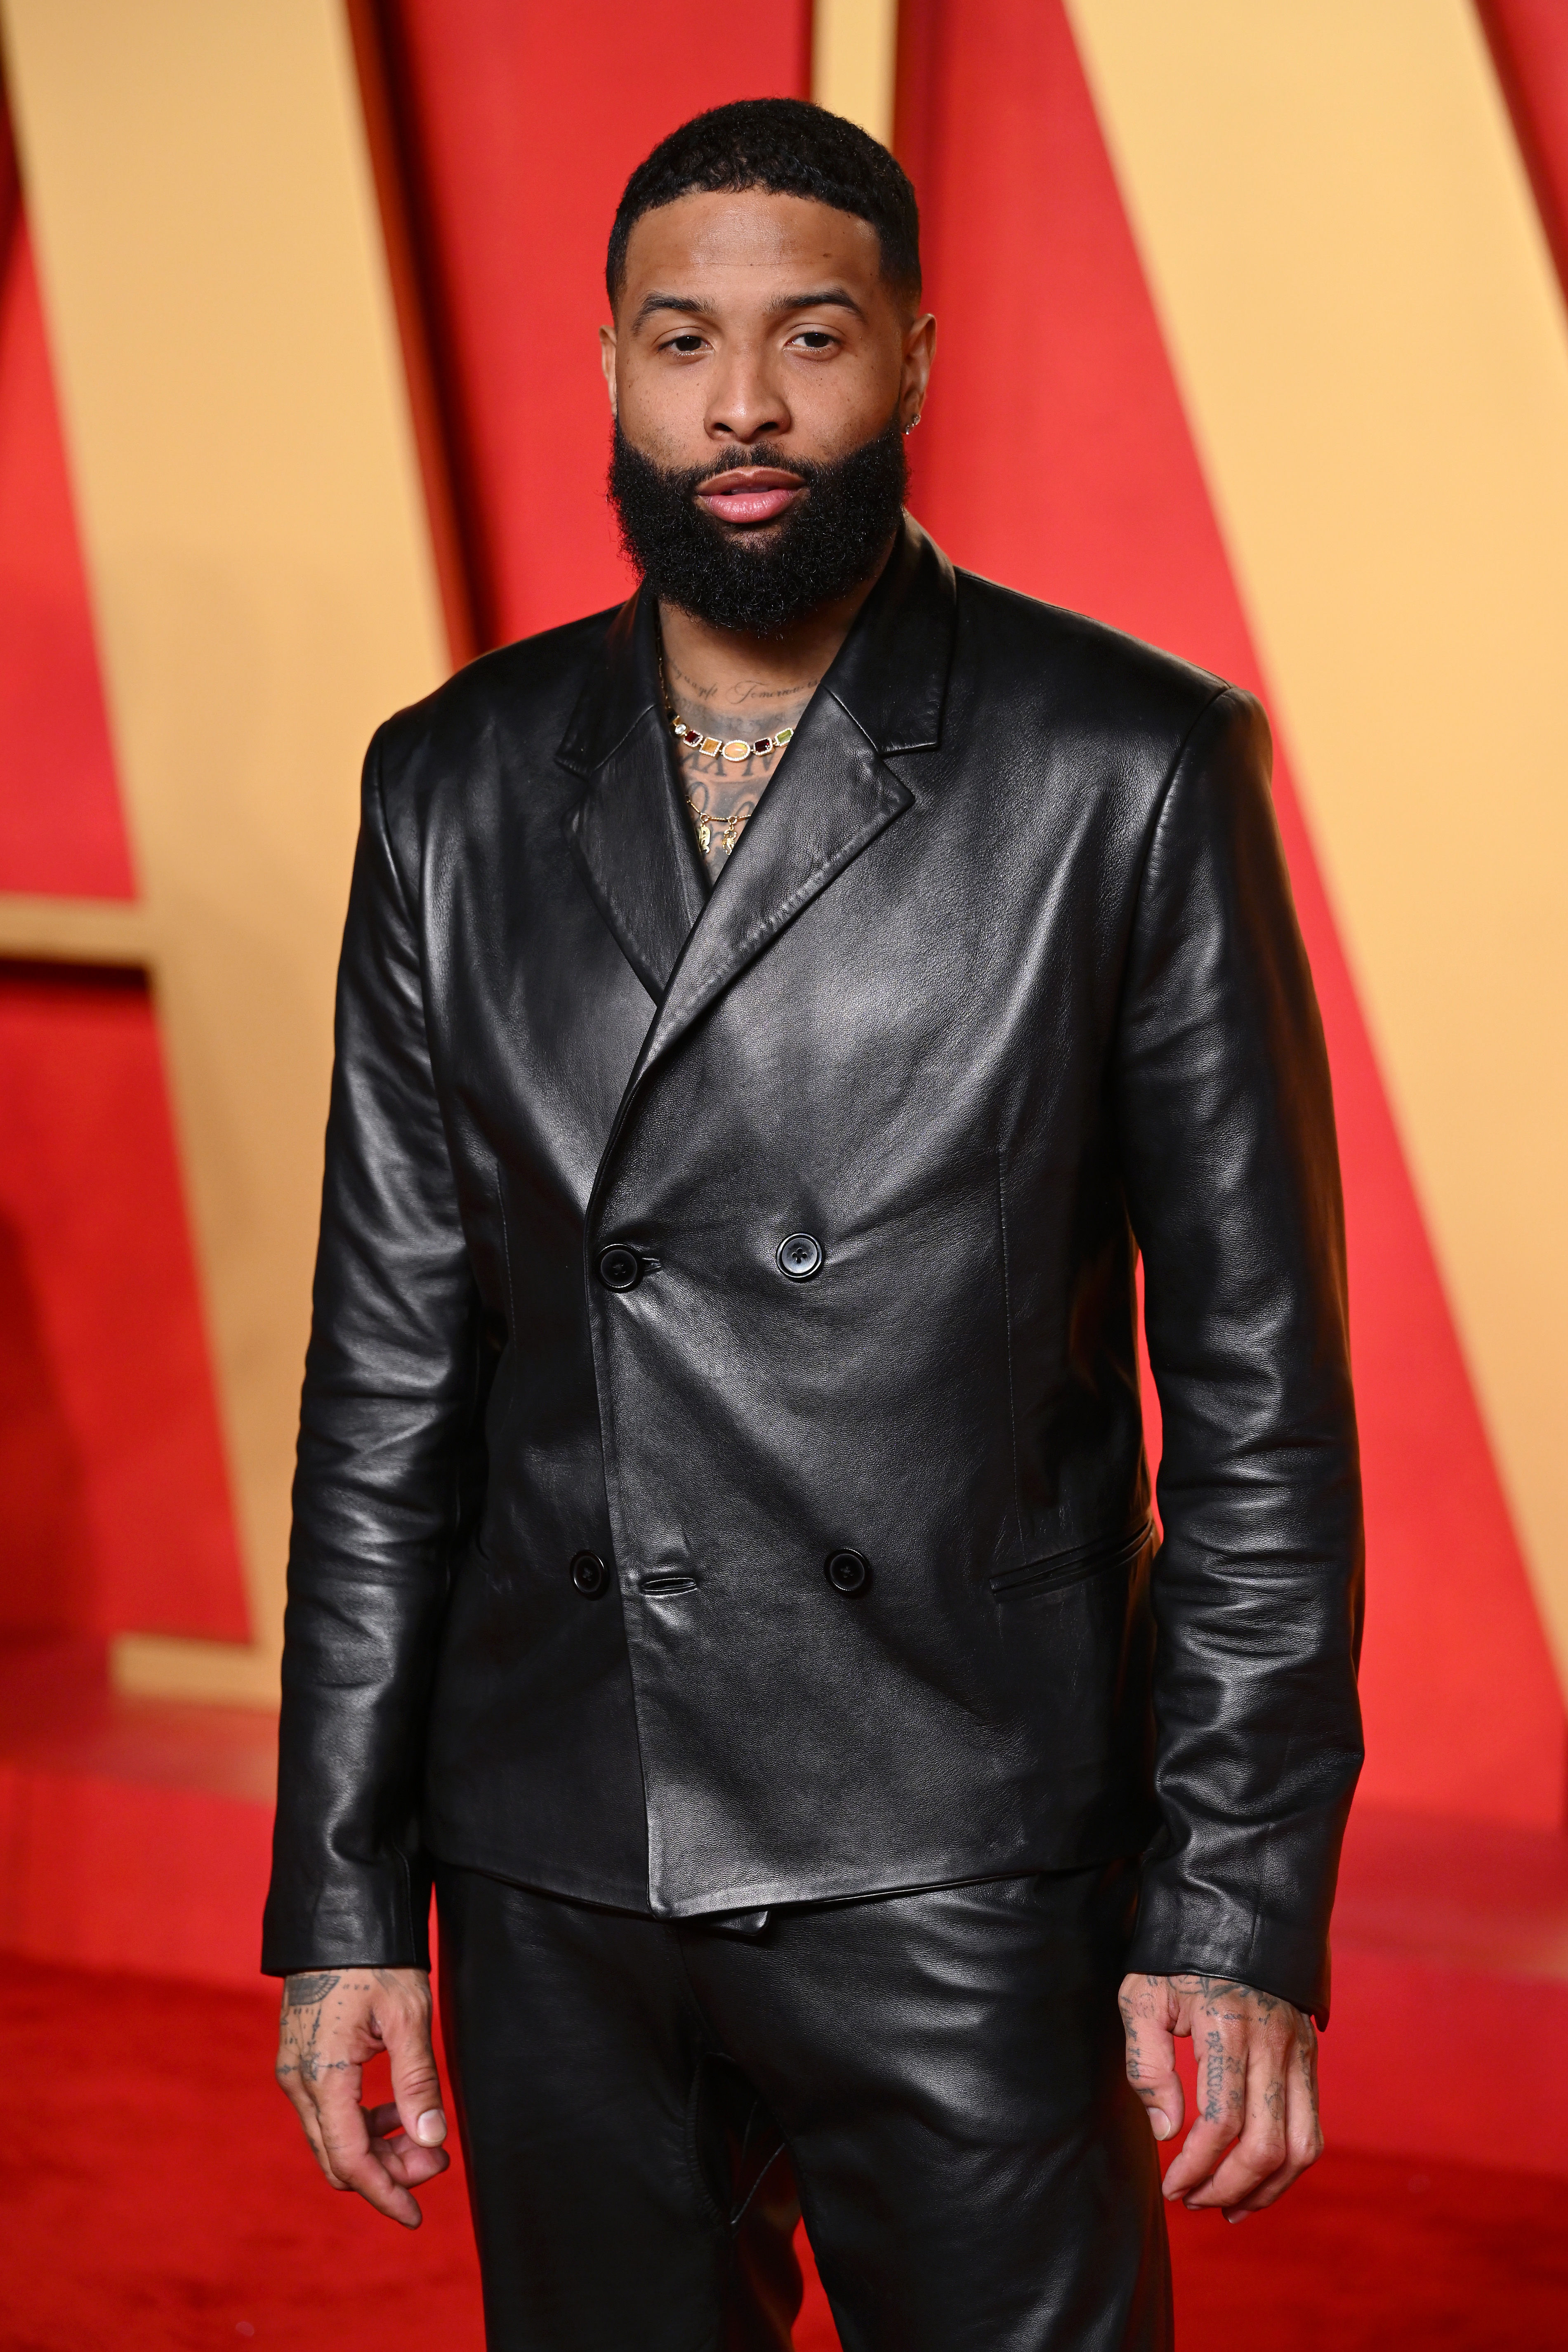 Odell attended the Vanity Fair party with Kim